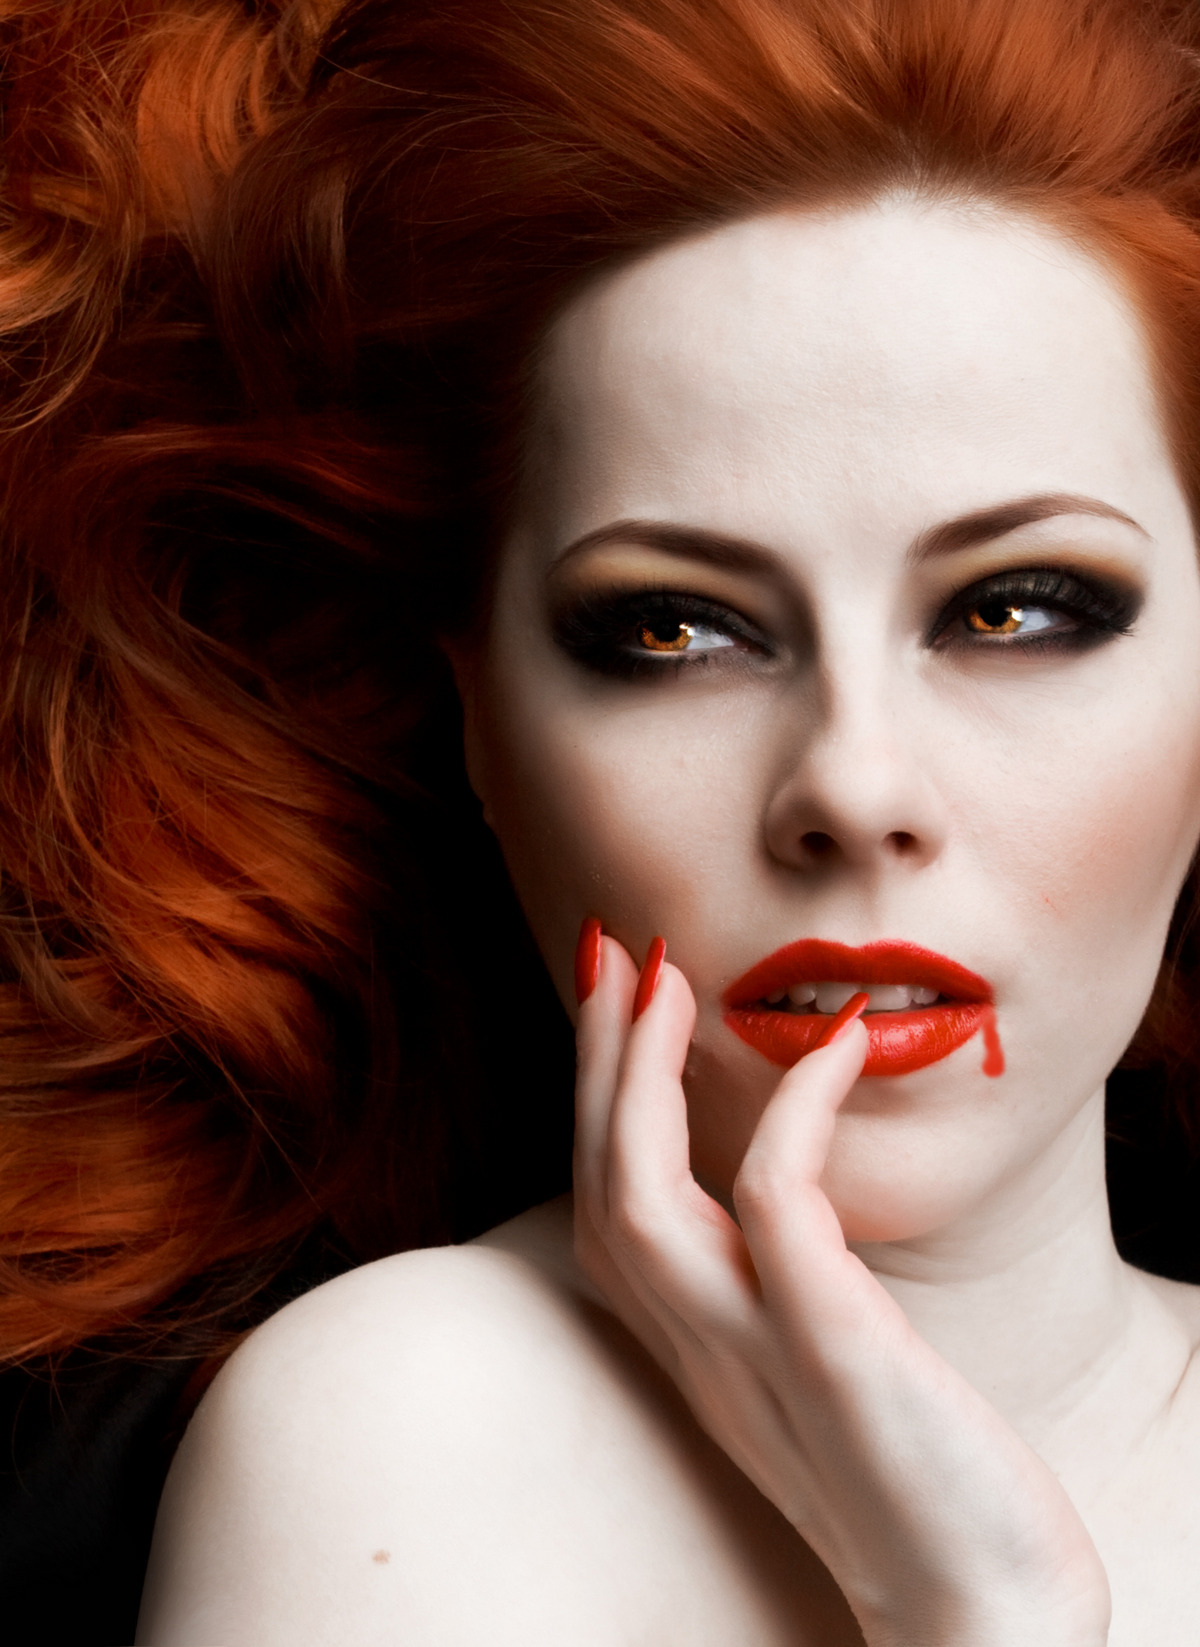 Deceased Redheads Become Vampires